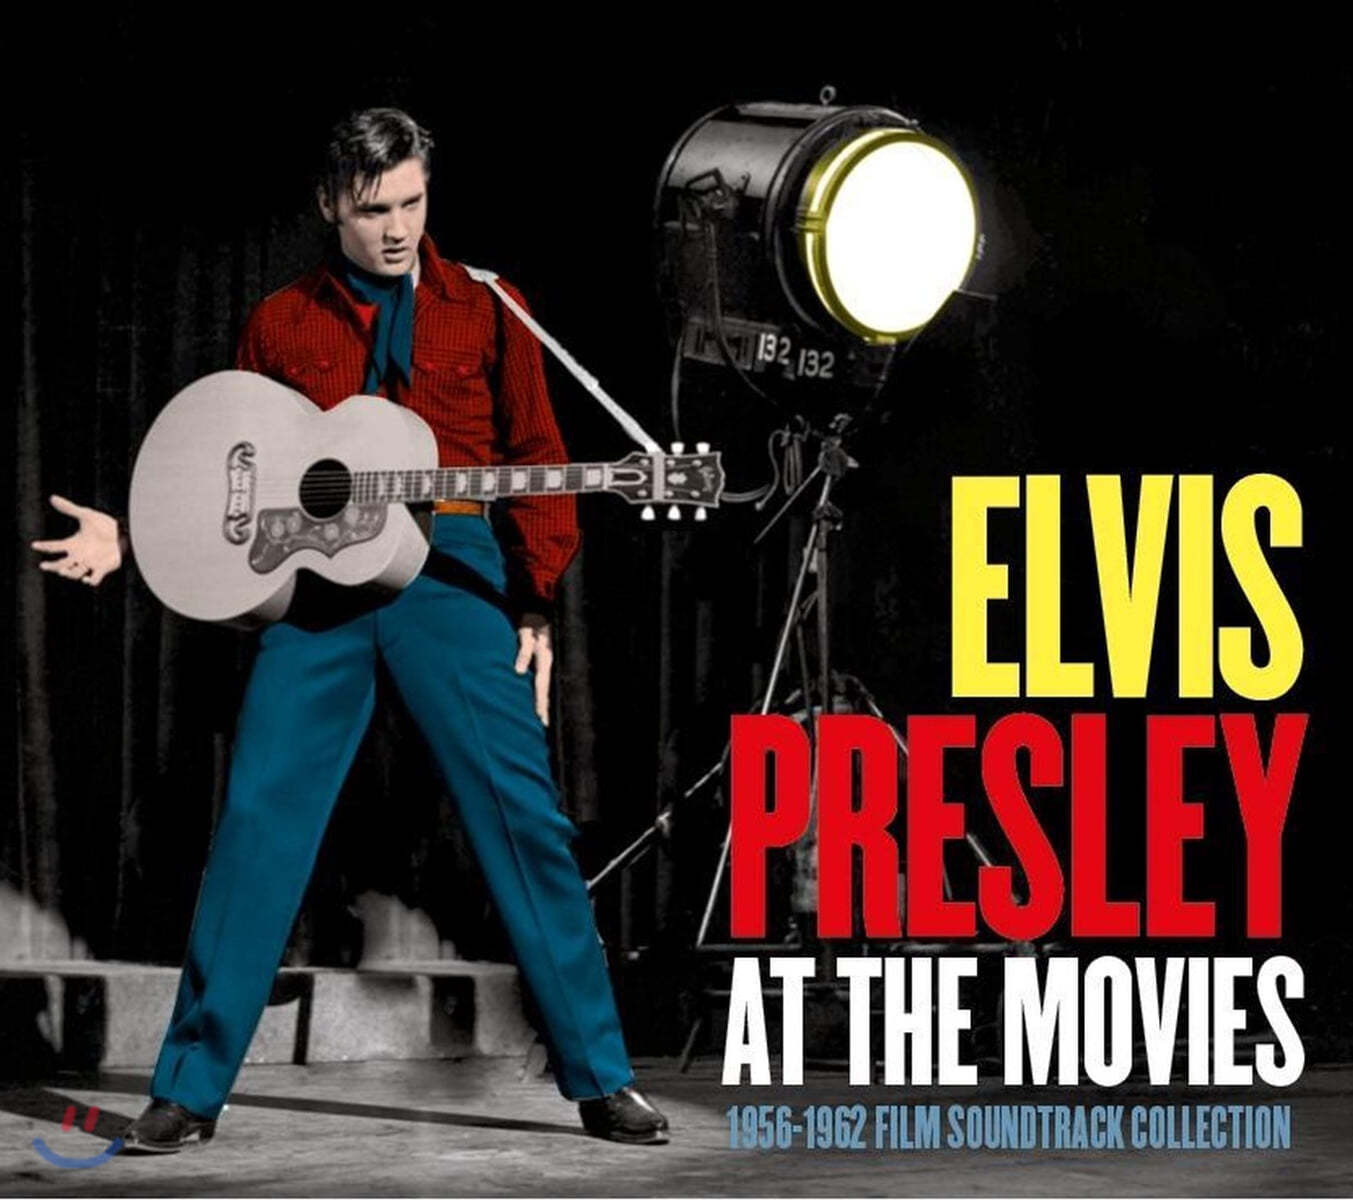 Elvis Presley (엘비스 프레슬리) - At the Movies: 1956-1962 Film Soundtrack Collection